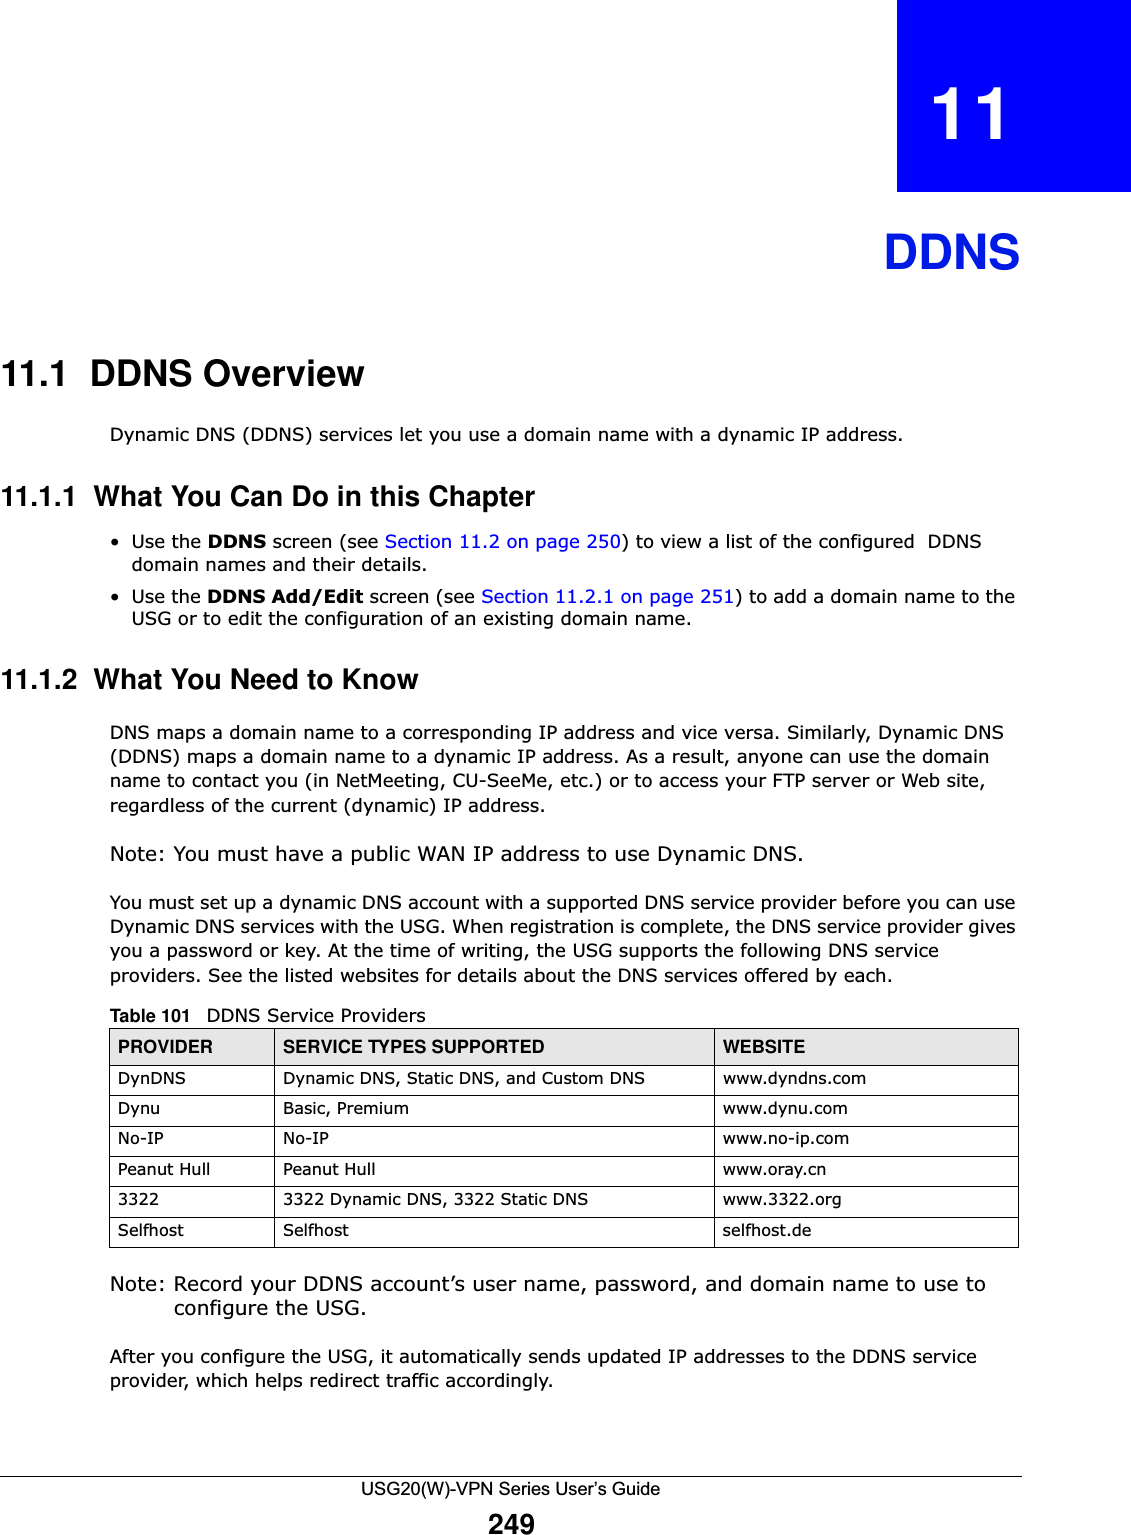 USG20(W)-VPN Series User’s Guide249CHAPTER   11  DDNS11.1  DDNS OverviewDynamic DNS (DDNS) services let you use a domain name with a dynamic IP address.11.1.1  What You Can Do in this Chapter•Use the DDNS screen (see Section 11.2 on page 250) to view a list of the configured  DDNS domain names and their details.•Use the DDNS Add/Edit screen (see Section 11.2.1 on page 251) to add a domain name to the USG or to edit the configuration of an existing domain name.11.1.2  What You Need to KnowDNS maps a domain name to a corresponding IP address and vice versa. Similarly, Dynamic DNS (DDNS) maps a domain name to a dynamic IP address. As a result, anyone can use the domain name to contact you (in NetMeeting, CU-SeeMe, etc.) or to access your FTP server or Web site, regardless of the current (dynamic) IP address.Note: You must have a public WAN IP address to use Dynamic DNS.You must set up a dynamic DNS account with a supported DNS service provider before you can use Dynamic DNS services with the USG. When registration is complete, the DNS service provider gives you a password or key. At the time of writing, the USG supports the following DNS service providers. See the listed websites for details about the DNS services offered by each. Note: Record your DDNS account’s user name, password, and domain name to use to configure the USG.After you configure the USG, it automatically sends updated IP addresses to the DDNS service provider, which helps redirect traffic accordingly.Table 101   DDNS Service ProvidersPROVIDER SERVICE TYPES SUPPORTED WEBSITEDynDNS Dynamic DNS, Static DNS, and Custom DNS www.dyndns.comDynu Basic, Premium www.dynu.comNo-IP No-IP www.no-ip.comPeanut Hull  Peanut Hull www.oray.cn 3322 3322 Dynamic DNS, 3322 Static DNS www.3322.orgSelfhost Selfhost selfhost.de